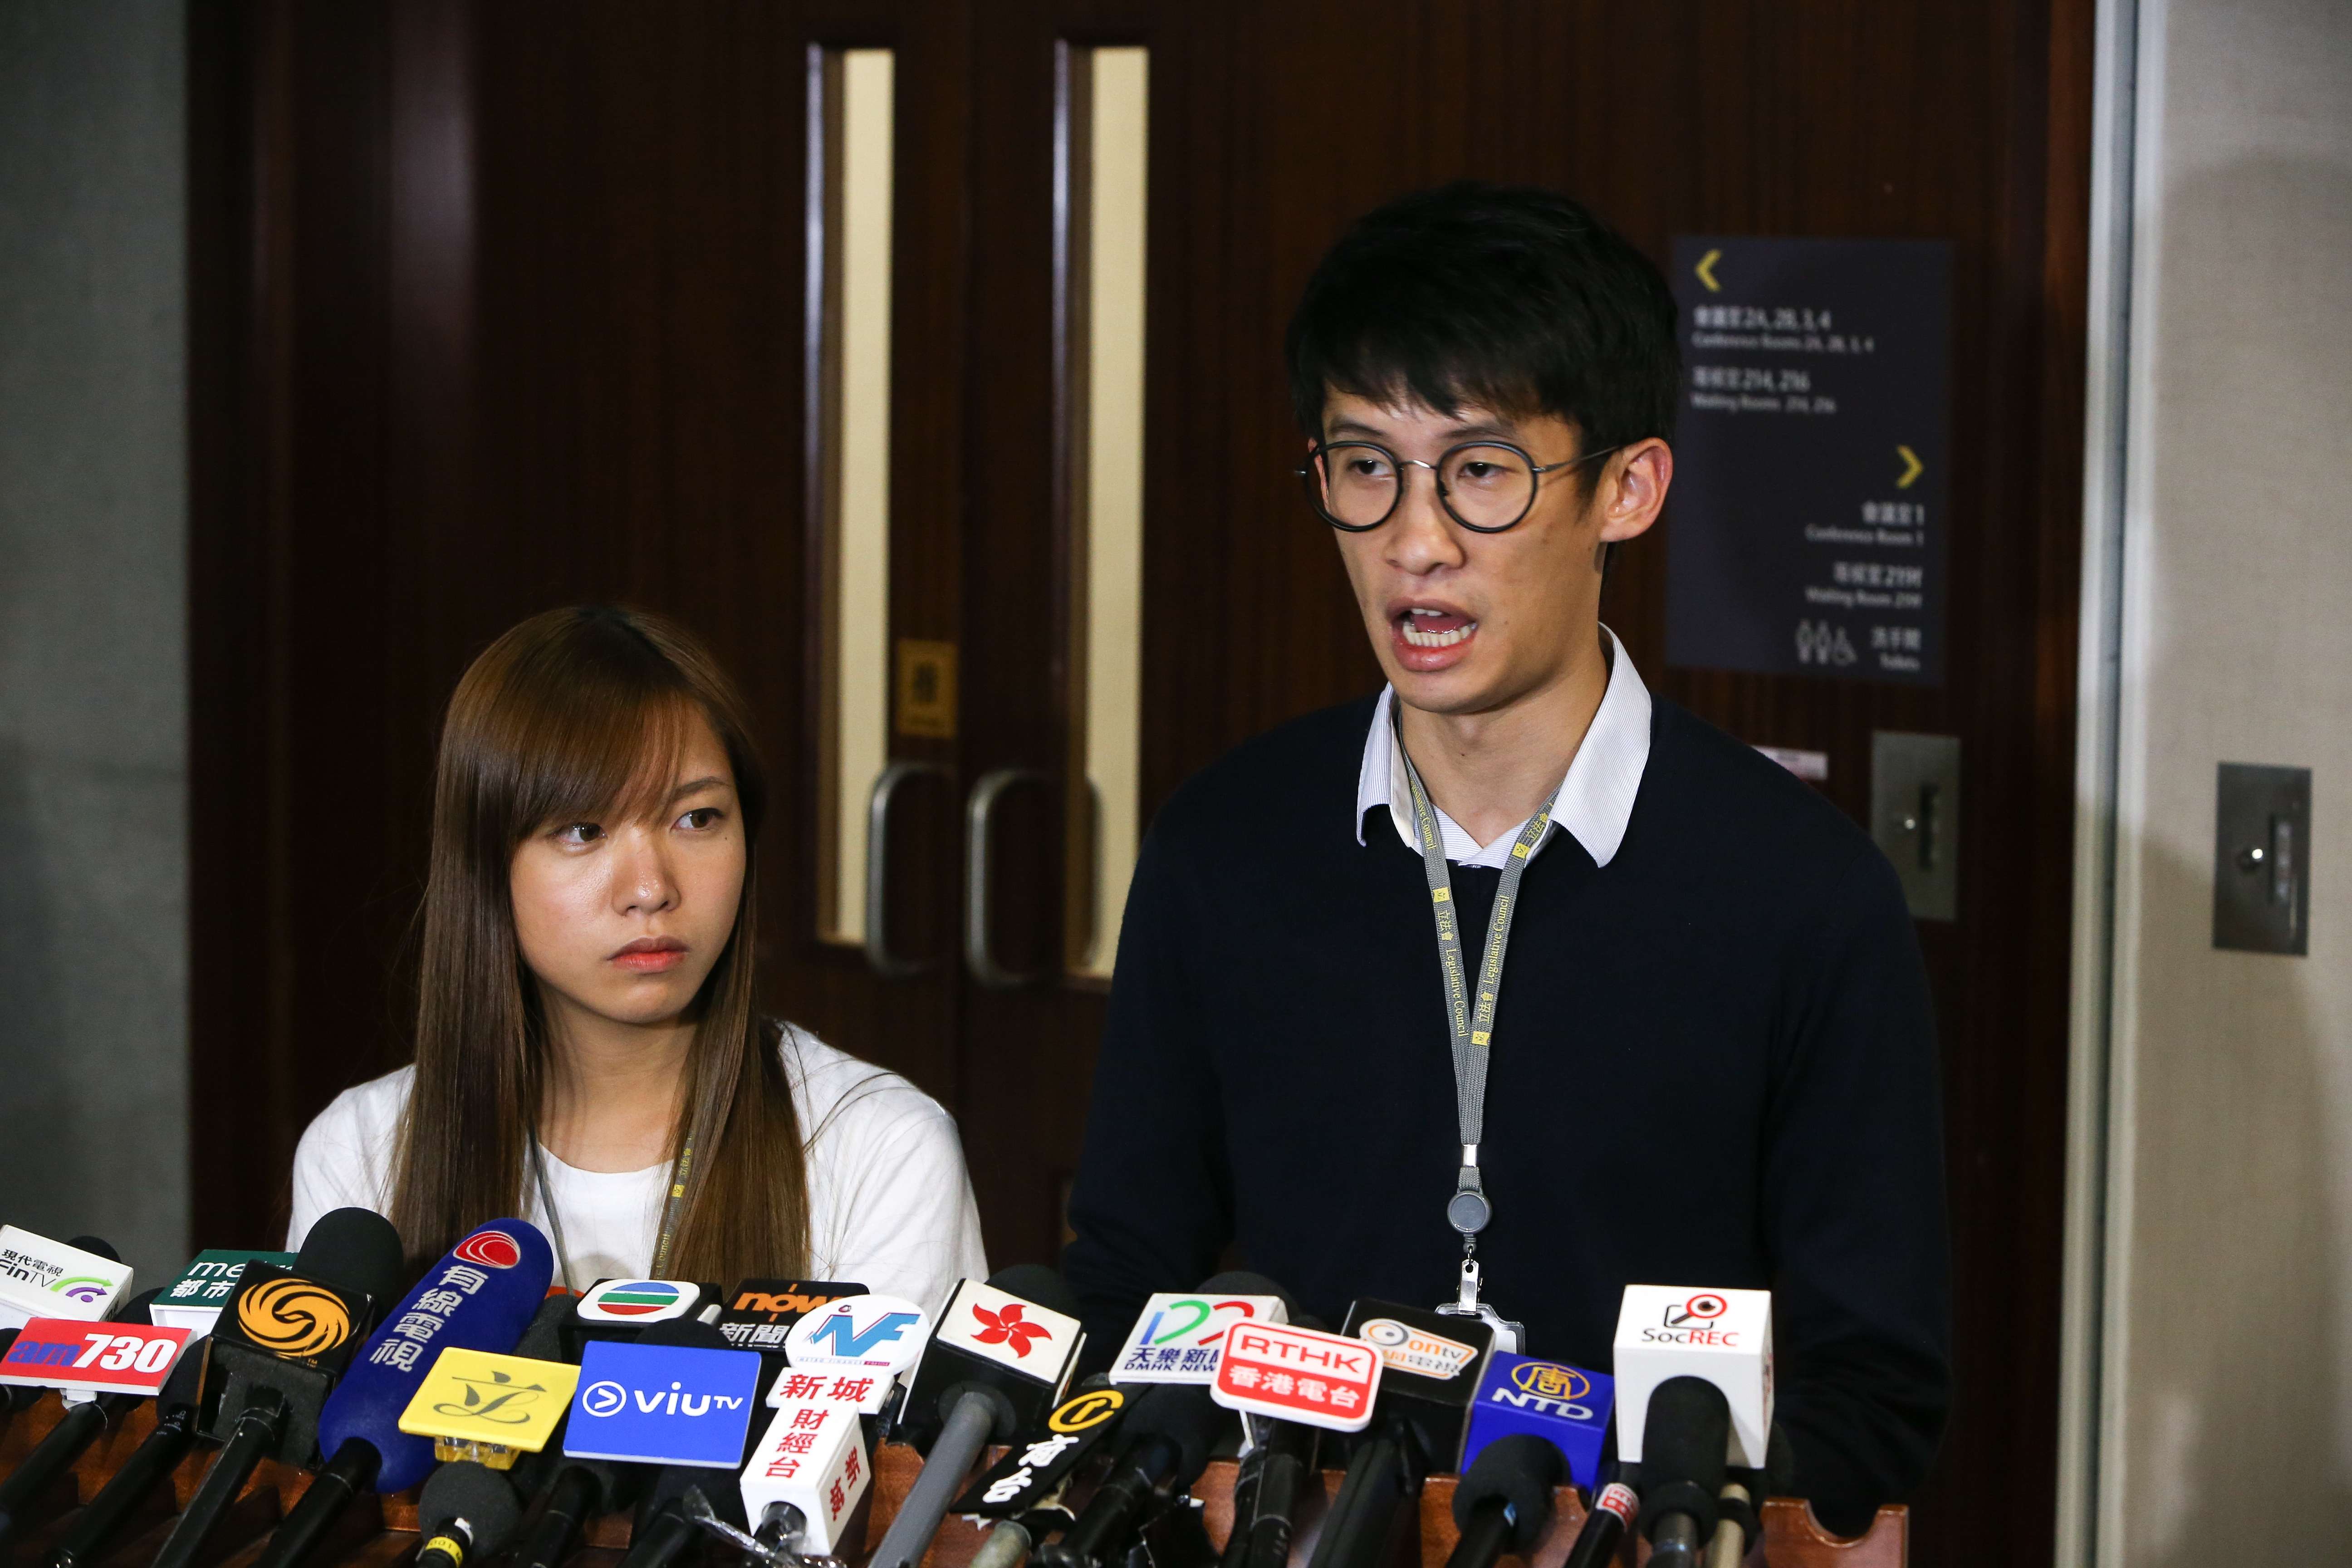 Yau Wai-ching (left) and Sixtus Leung have had a rethink on the Legco oath. Photo: Dickson Lee